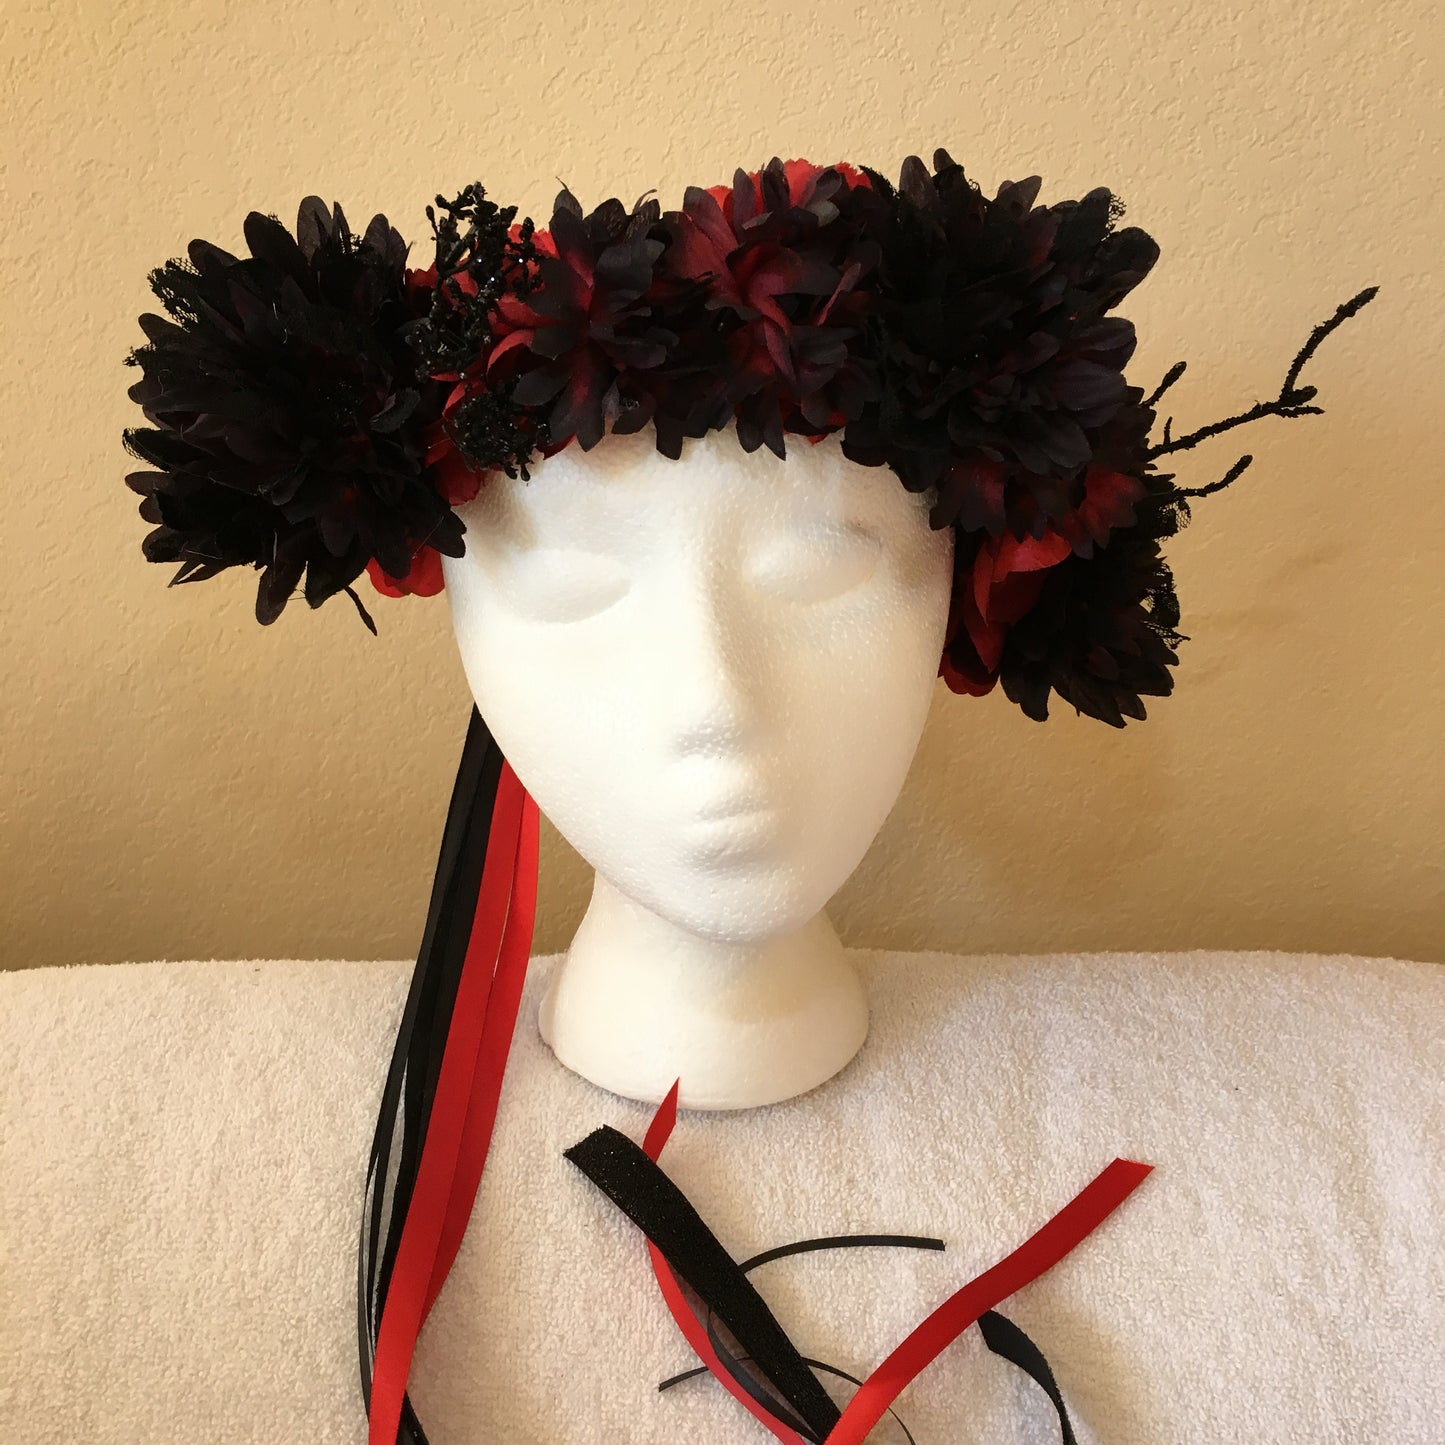 Large Wreath - Red & black flowers